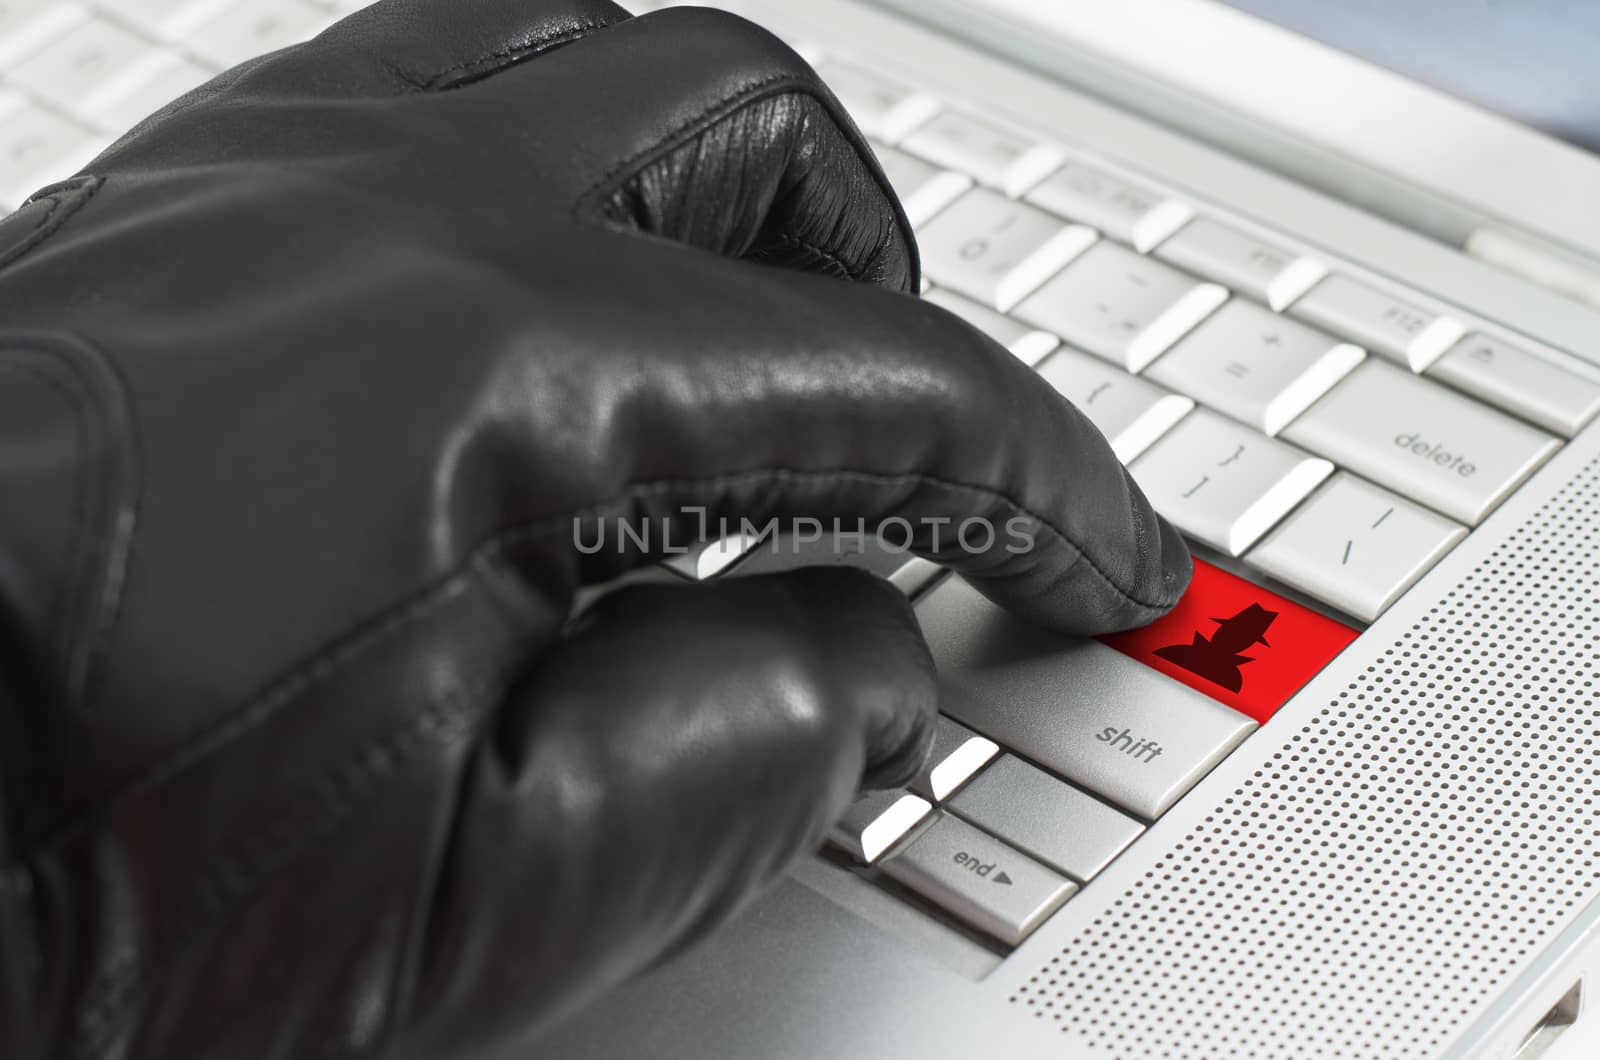 Online spy ware concept with hand wearing black leather glove pressing enter key on metallic laptop keyboard